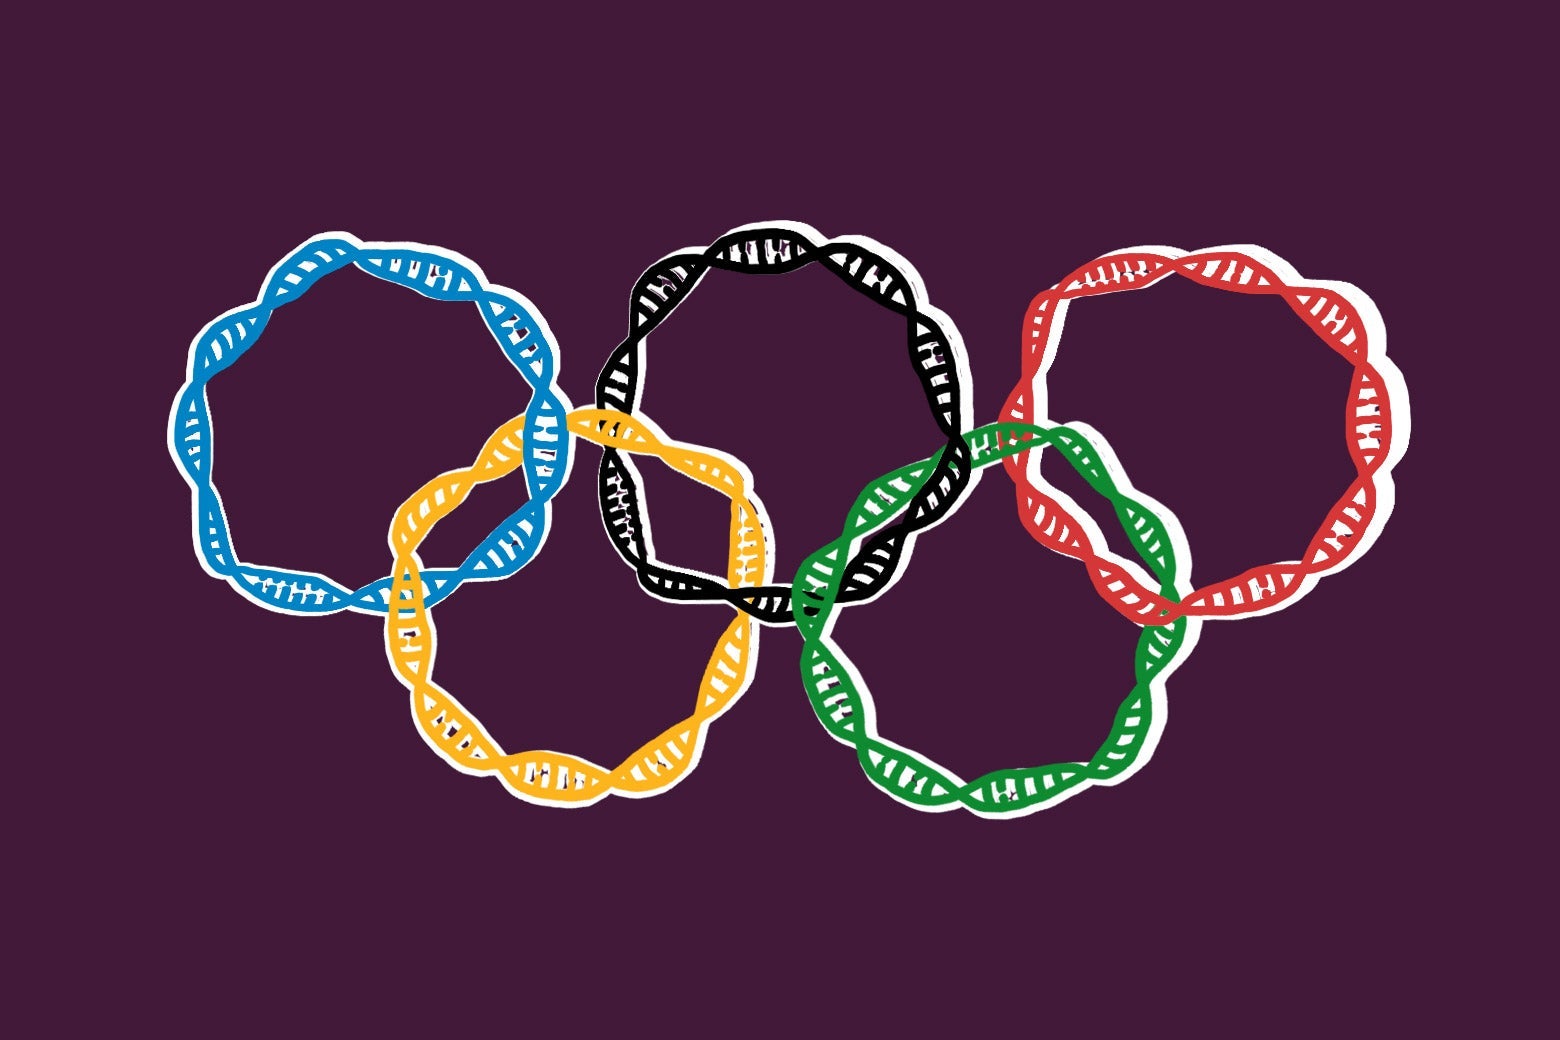 The Olympic rings made out of double helixes.